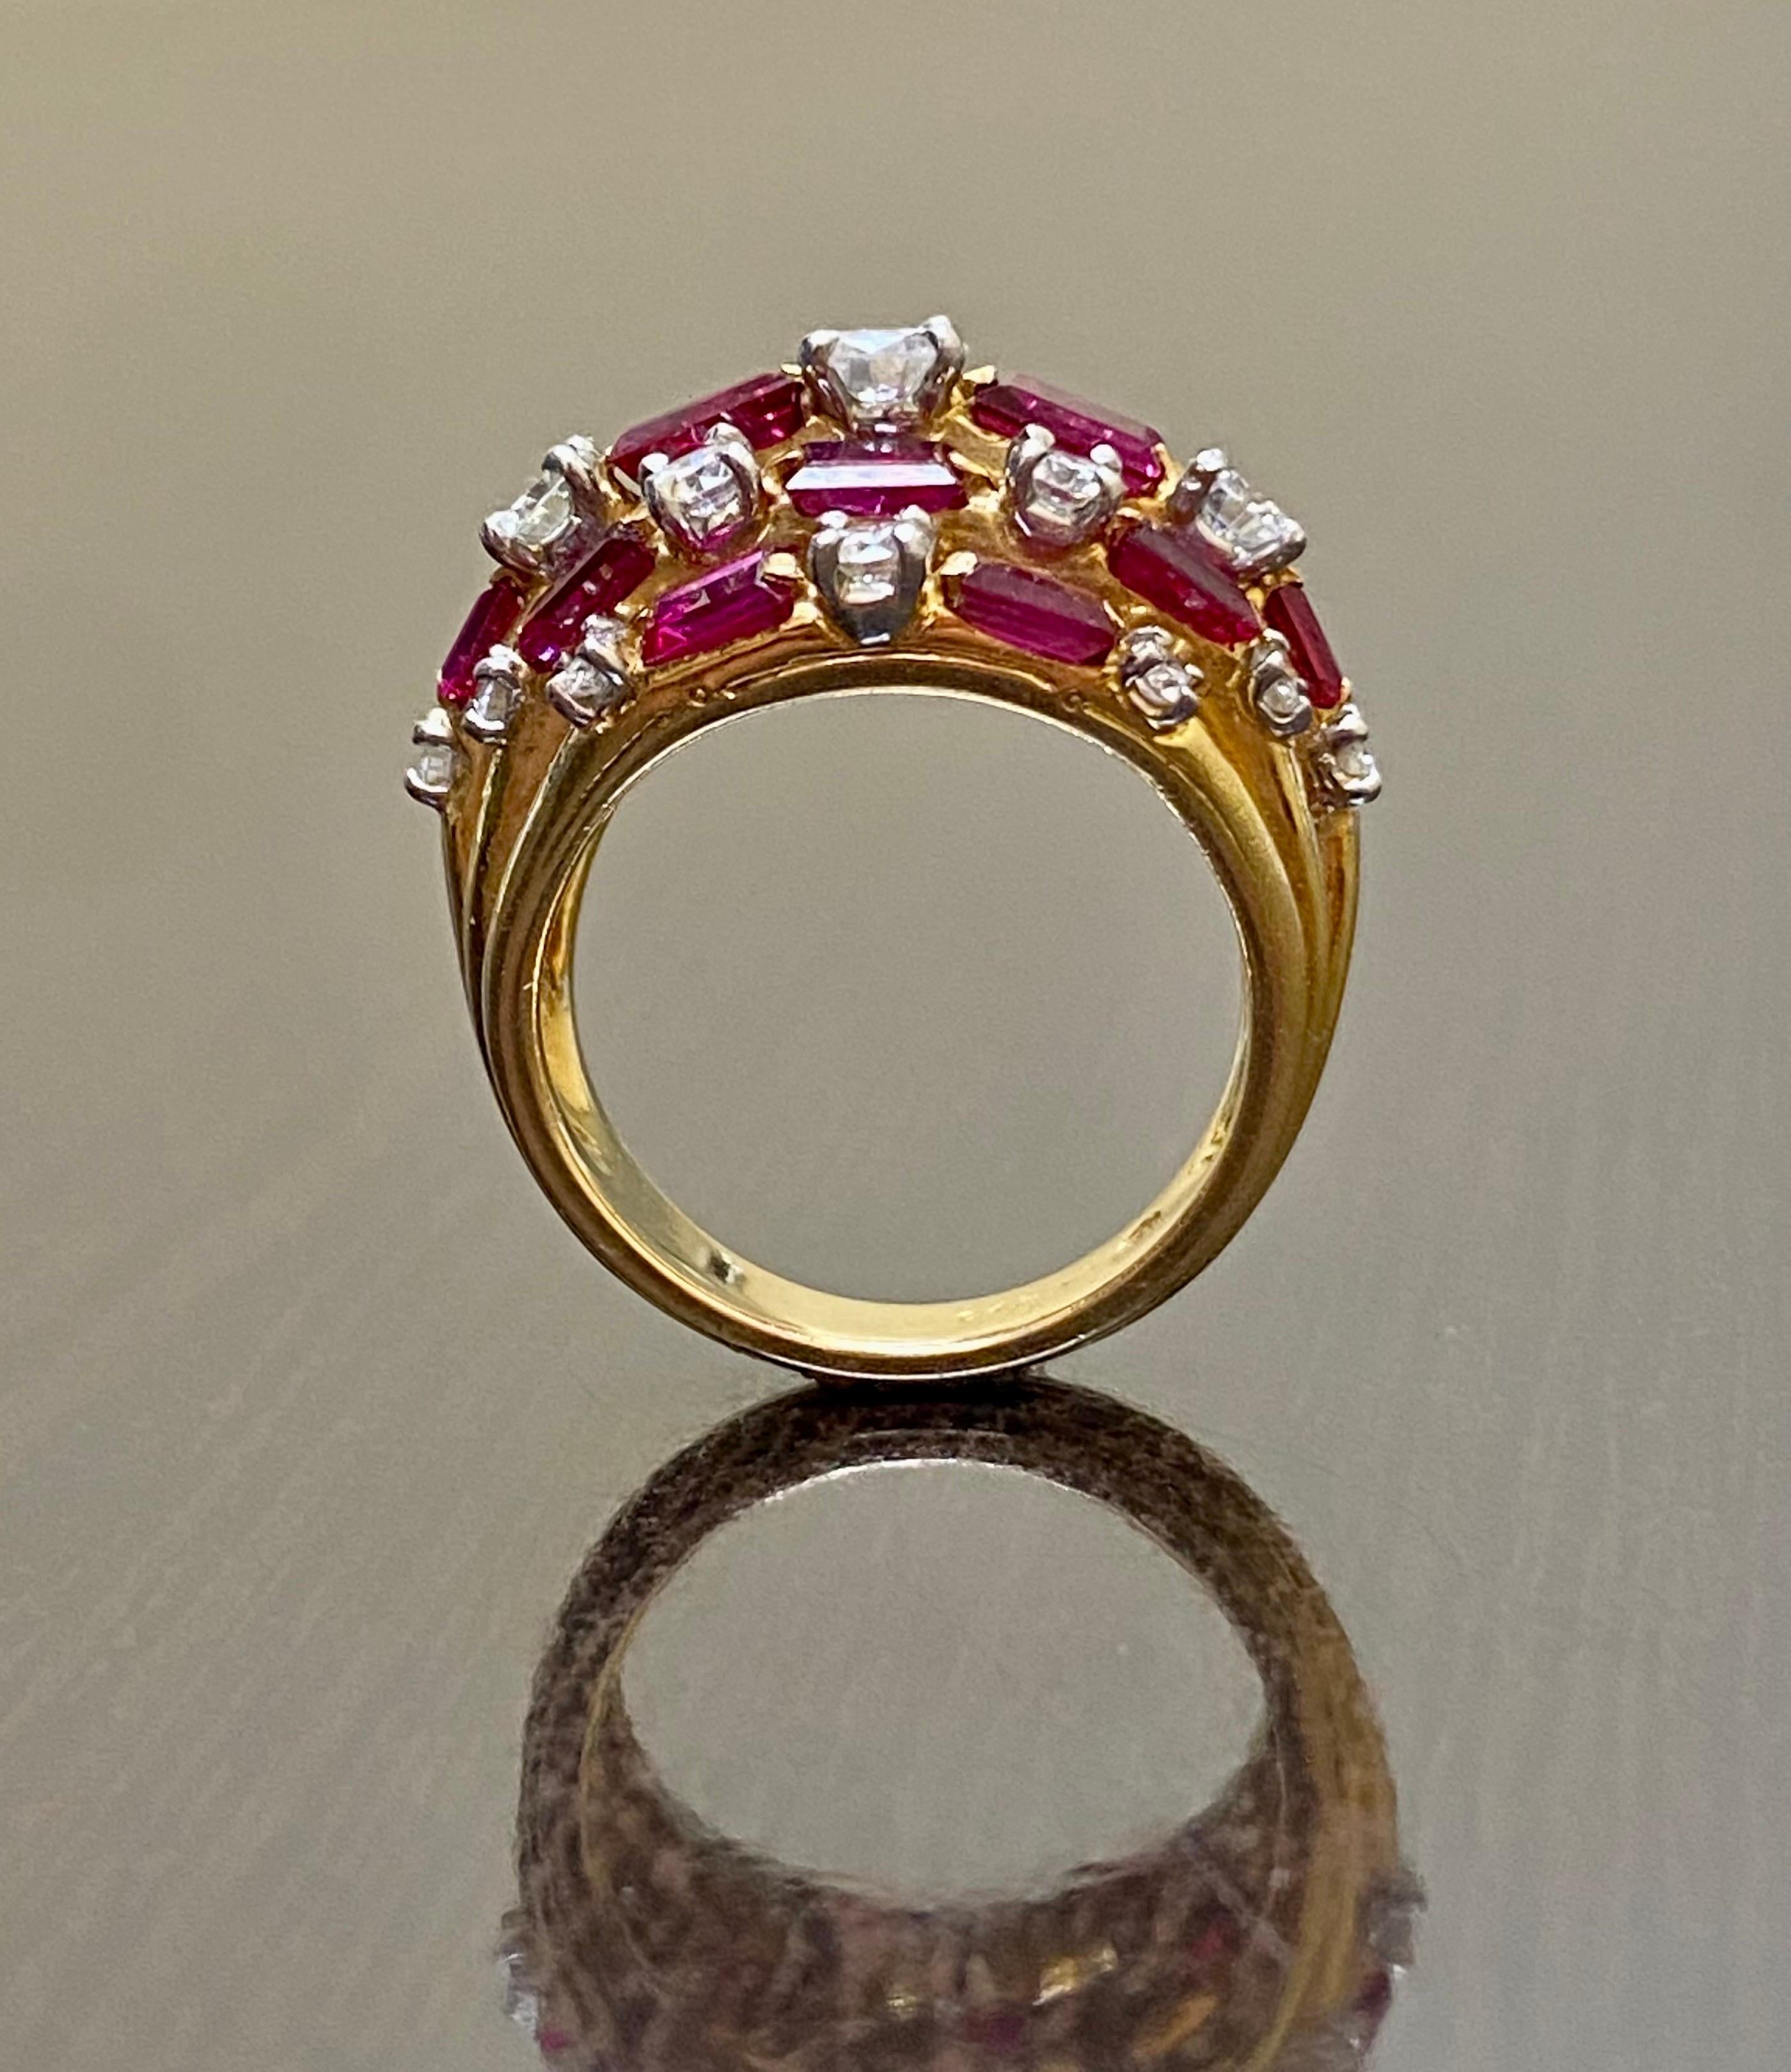 DeKara Designs Estate Collection

Metal- 18K Yellow Gold, .750, 90% Platinum 10 % Iridium.

Stones- 19 Round Diamonds F-H Color VS1 Clarity, Approximately 1.10 Carats, 14 Baguette Burmese Rubies, Approximately 3.20 Carats.

Size-6. Free Sizing only